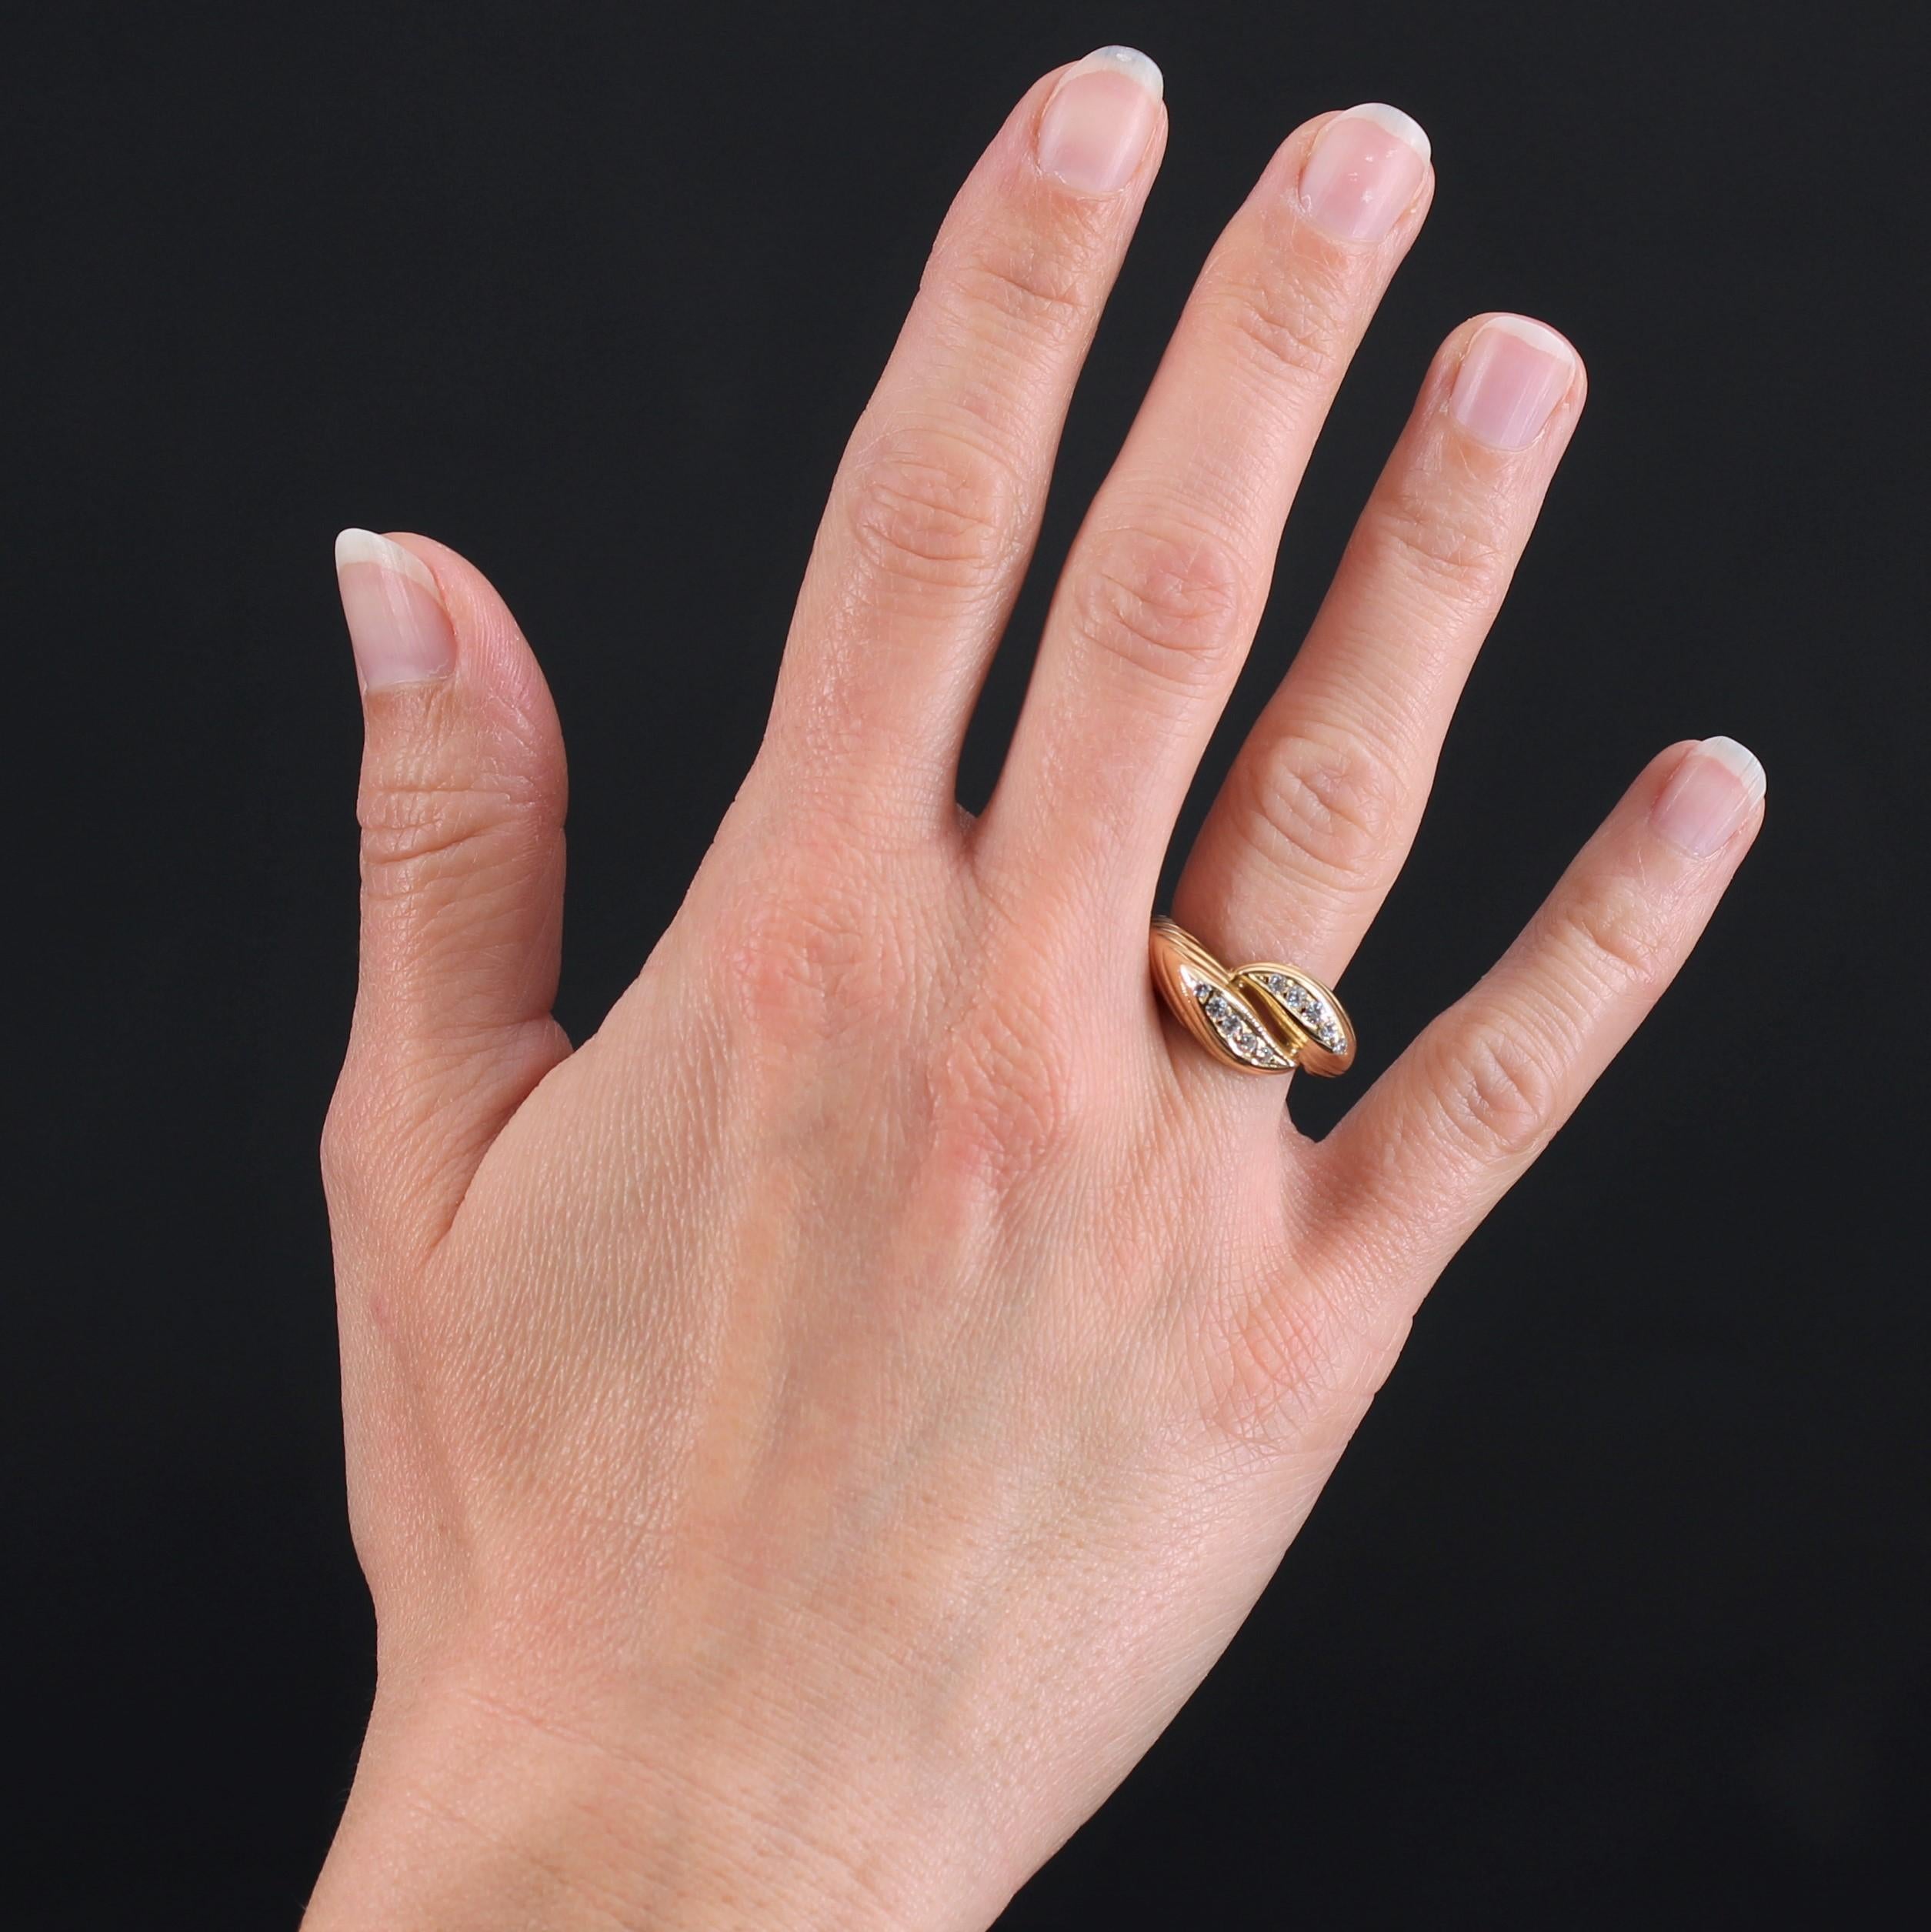 Ring in 18 karat yellow gold.
Second- hand ring in yellow gold, it is formed of 2 rings which join together on the top decorated each one with 5 modern brilliant- cut diamonds on patterns in wave. The ring is chiseled like a spike on half of its